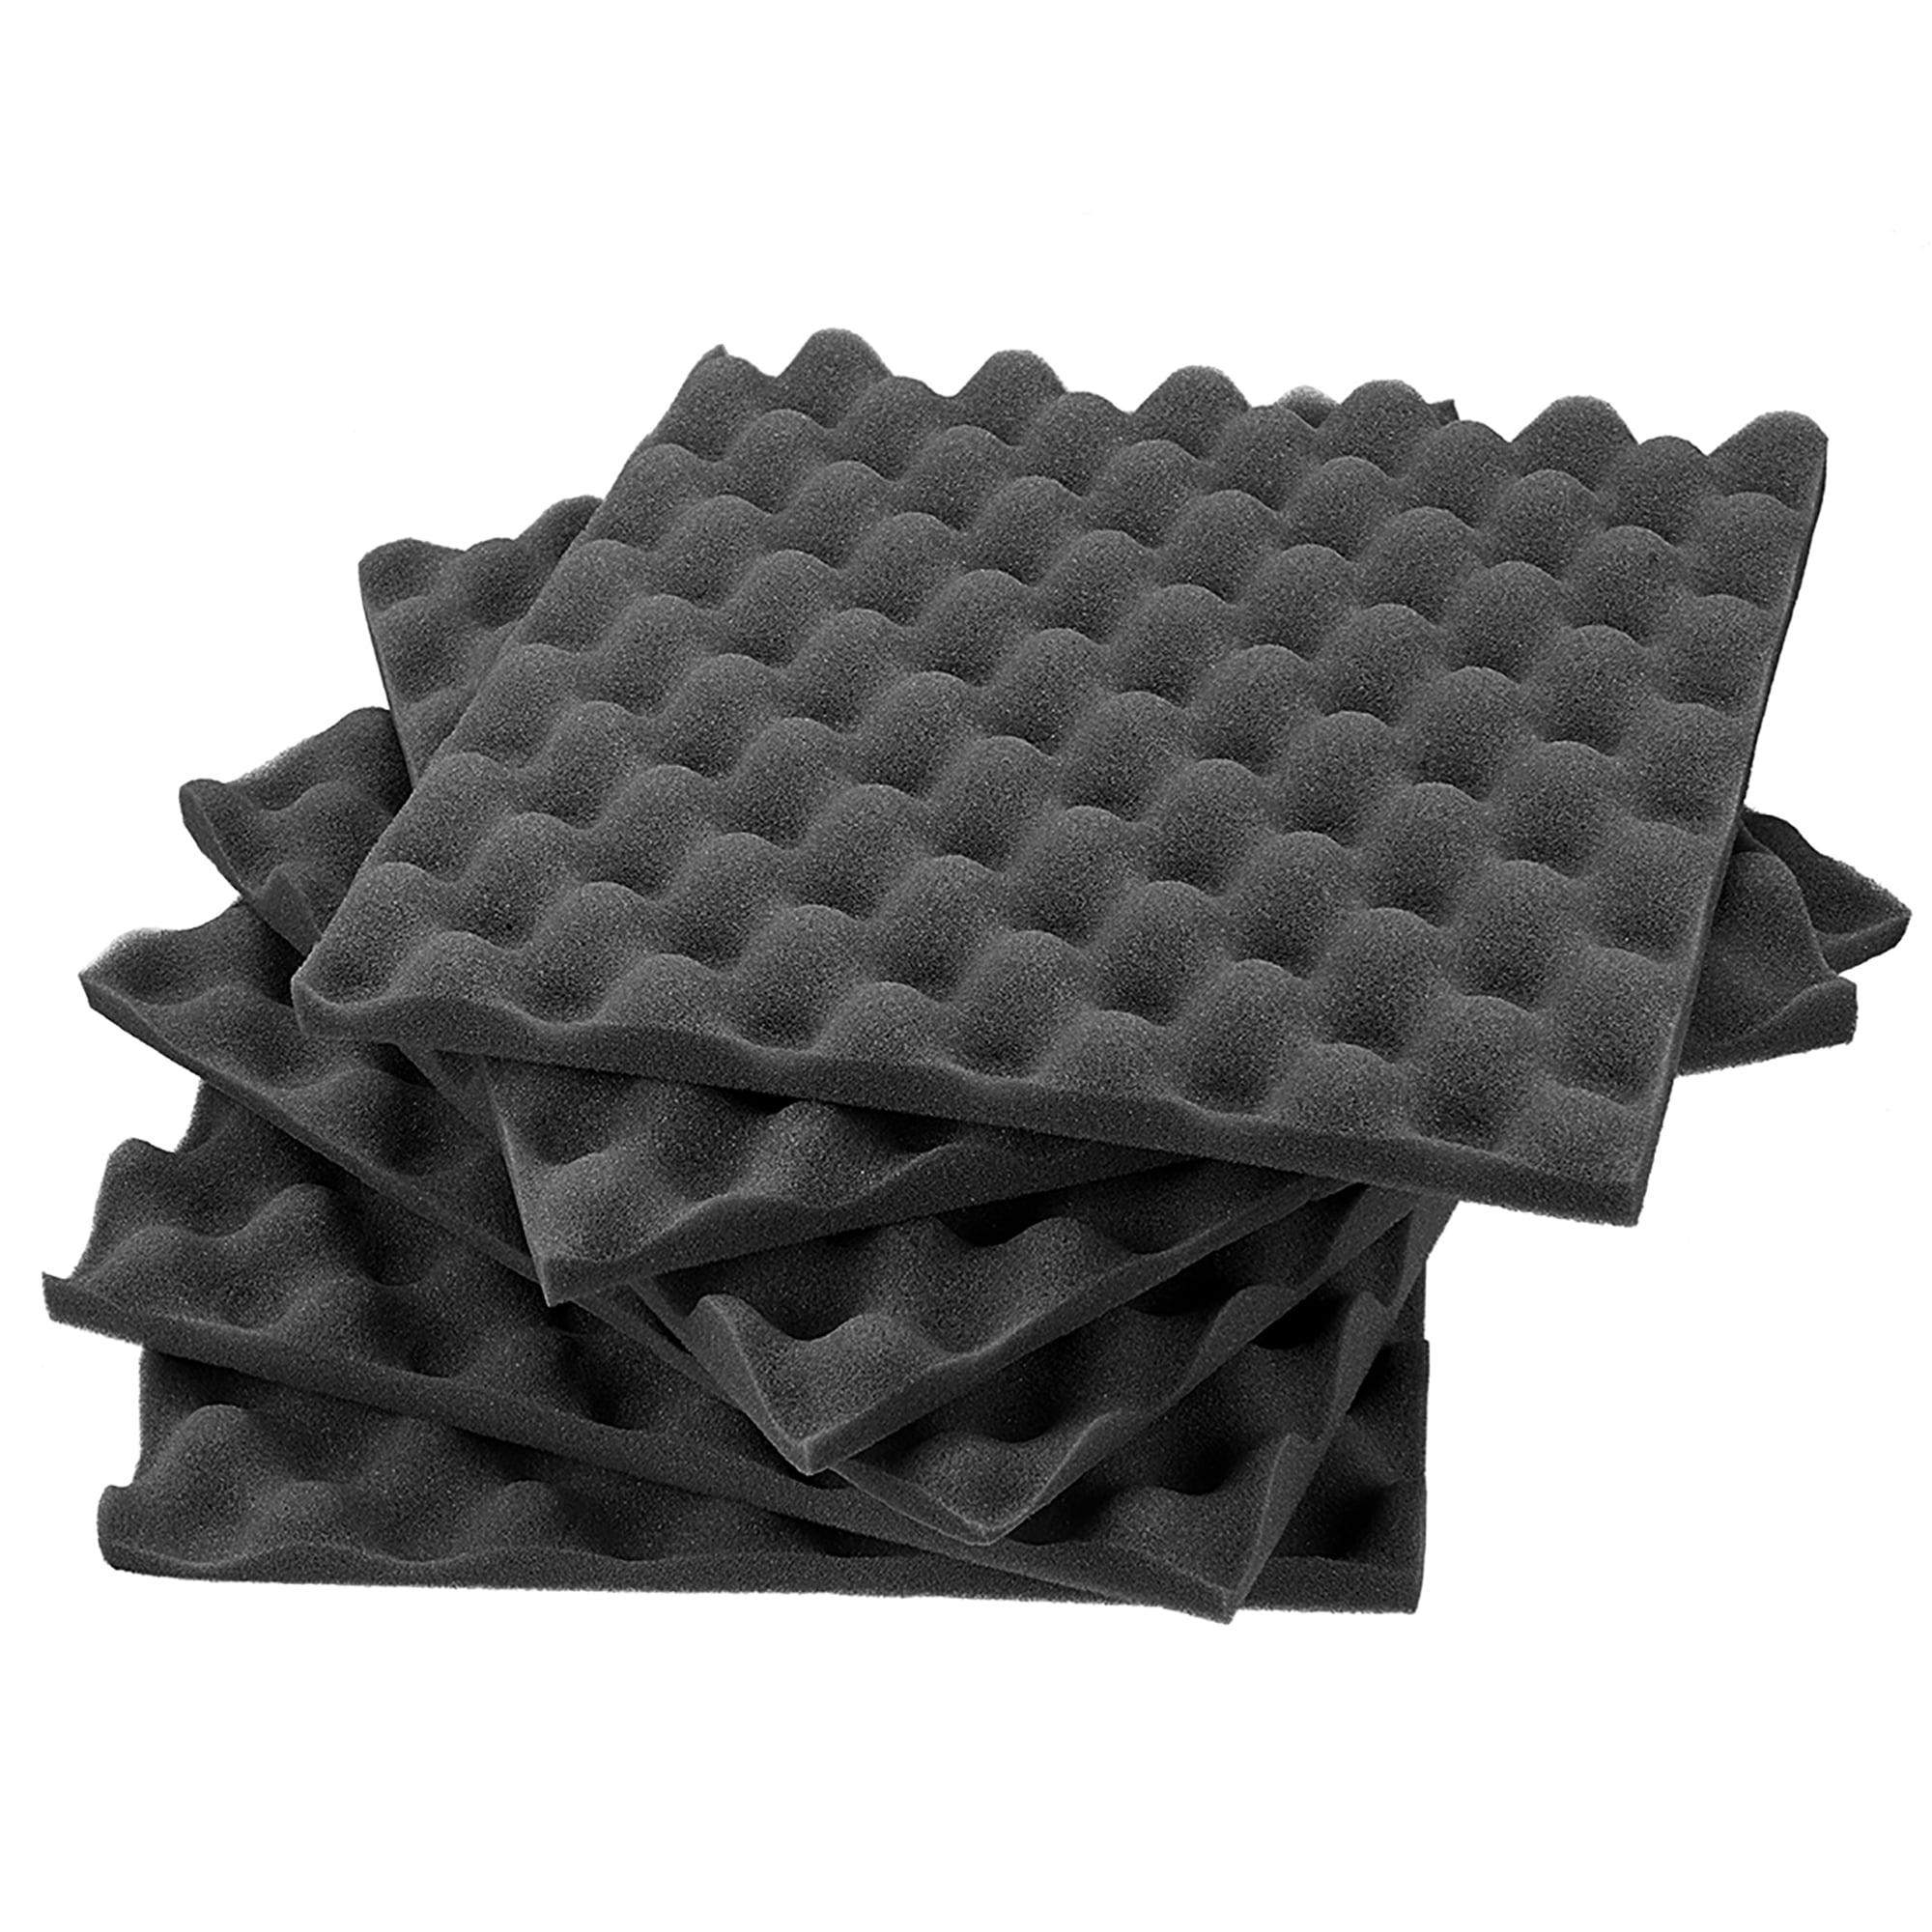 High density flame retardant black for Wall Ceiling Flame Retardant Durable High Density Polyurethane Material Soundproofing Sponge 03 Soundproofing Foam